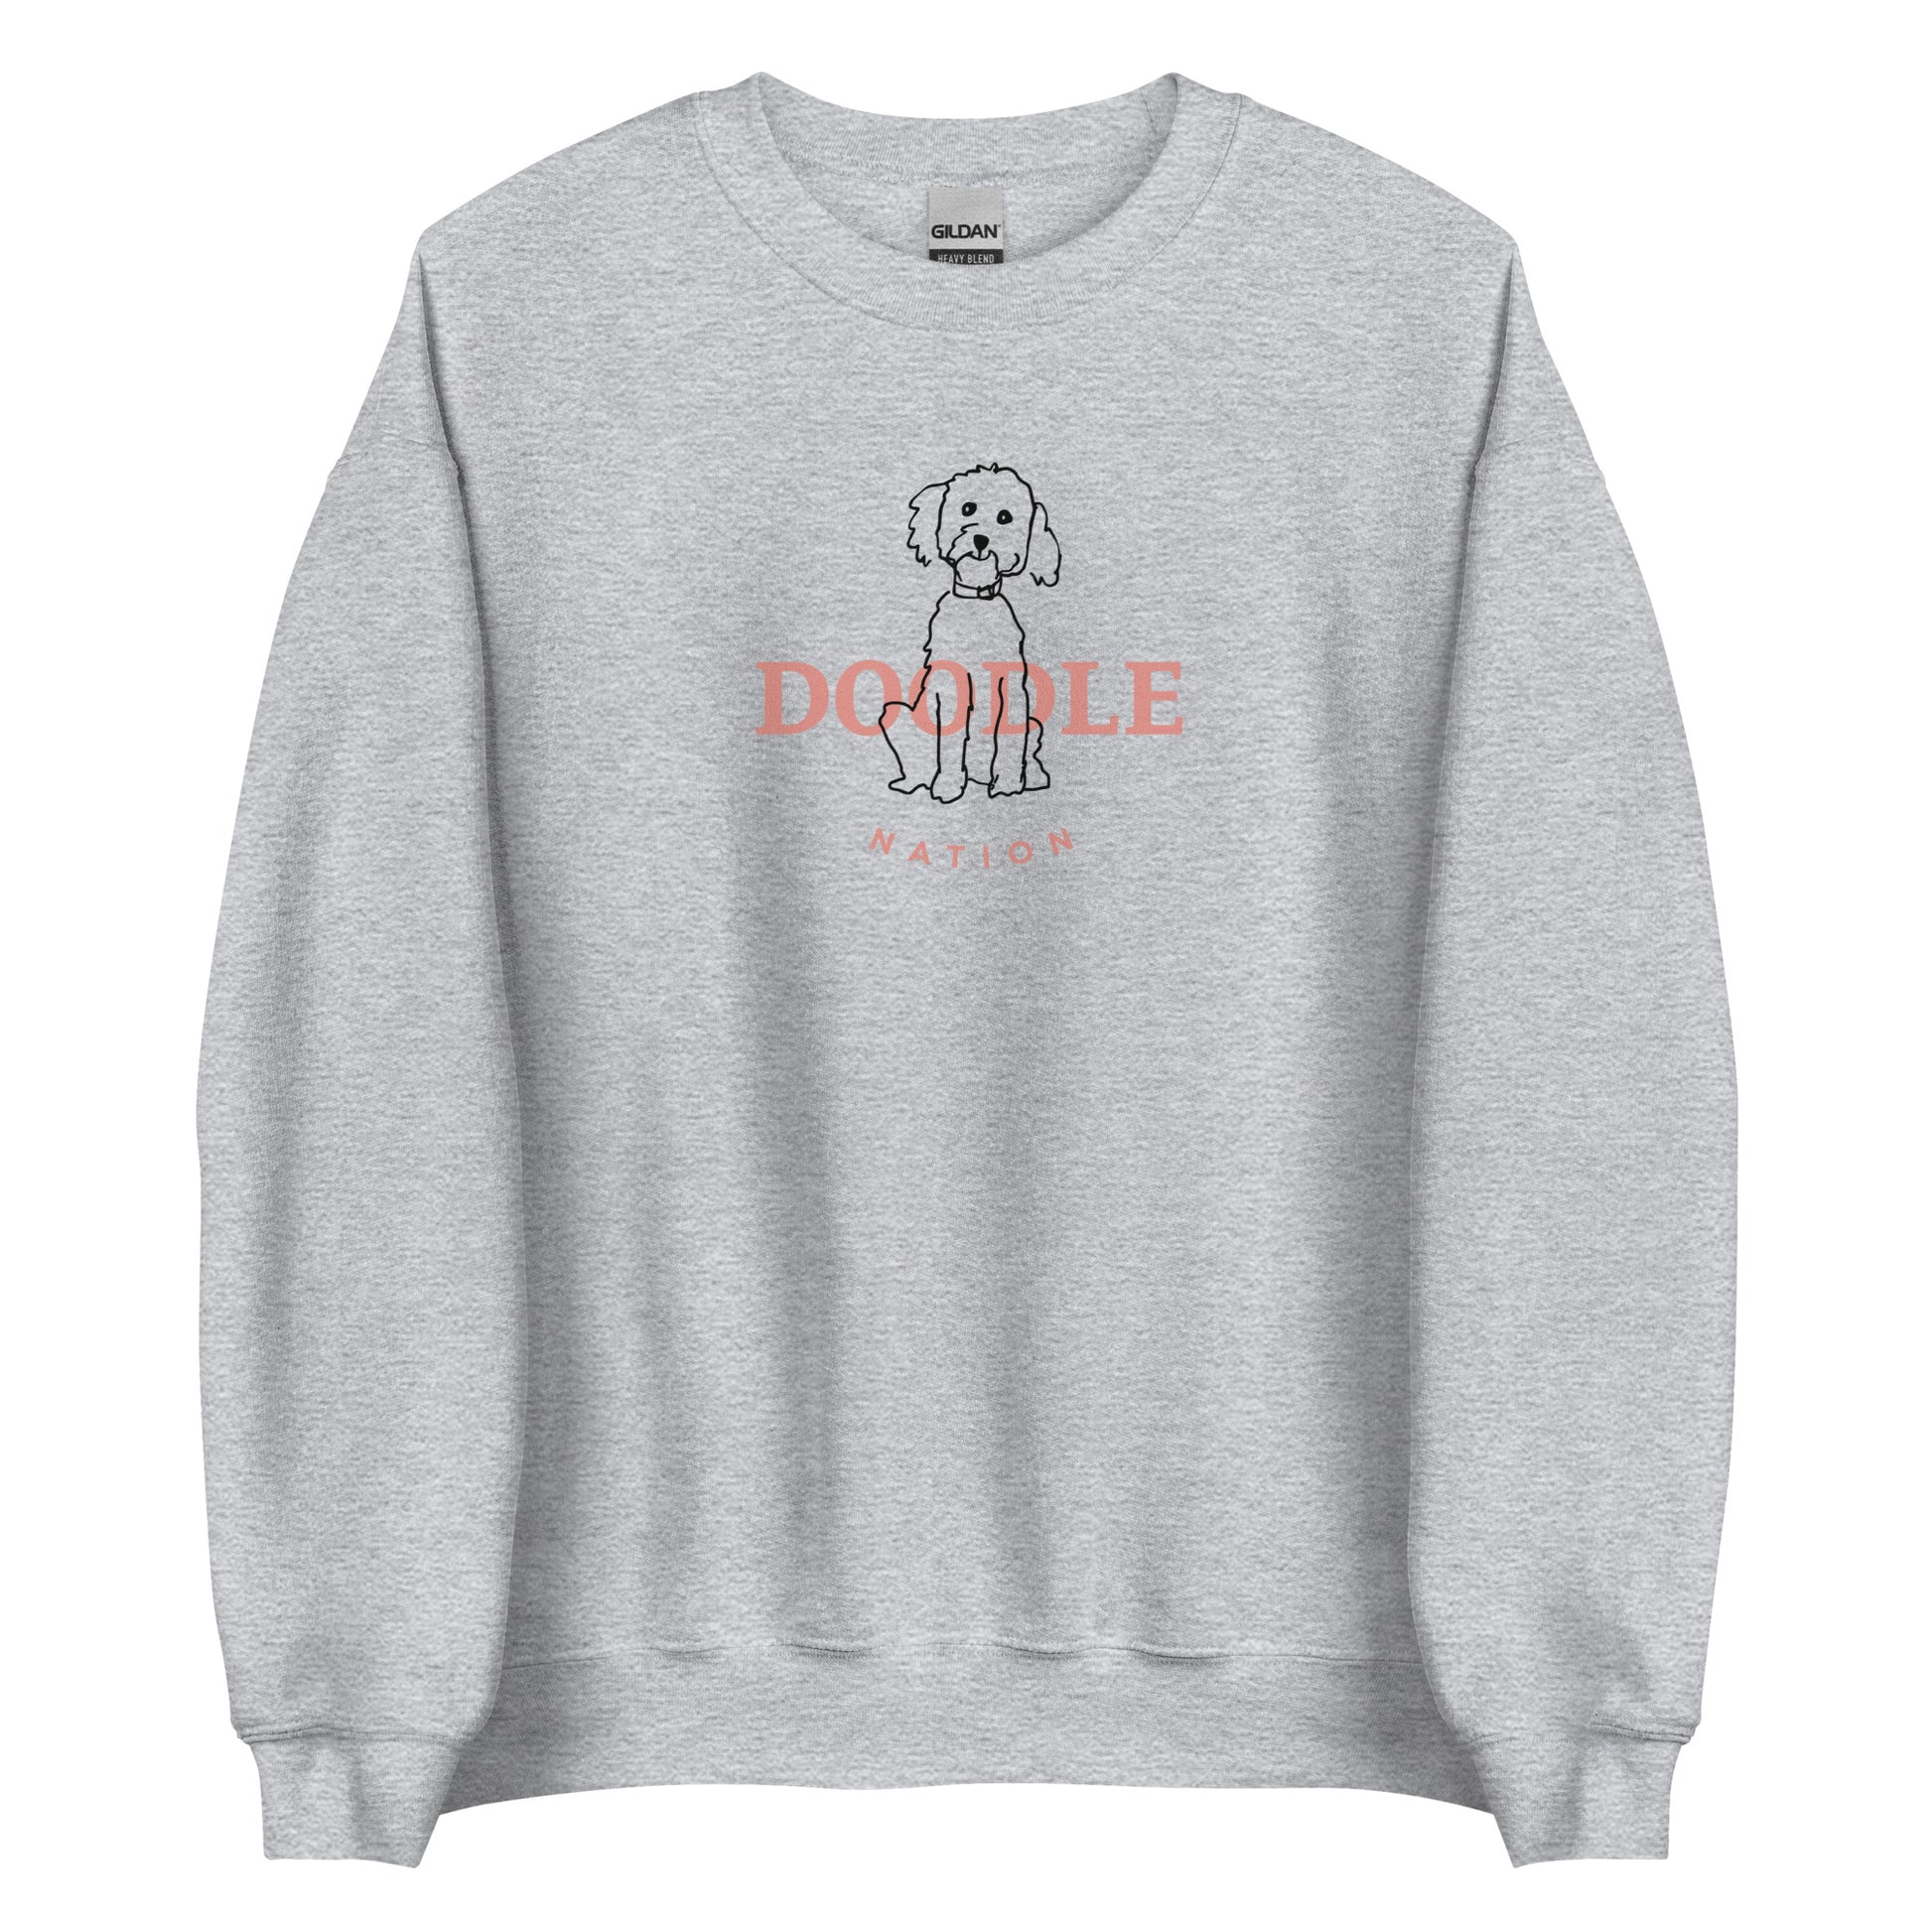 Goldendoodle crew neck sweatshirt with Goldendoodle and words "Doodle Nation" in sport grey color